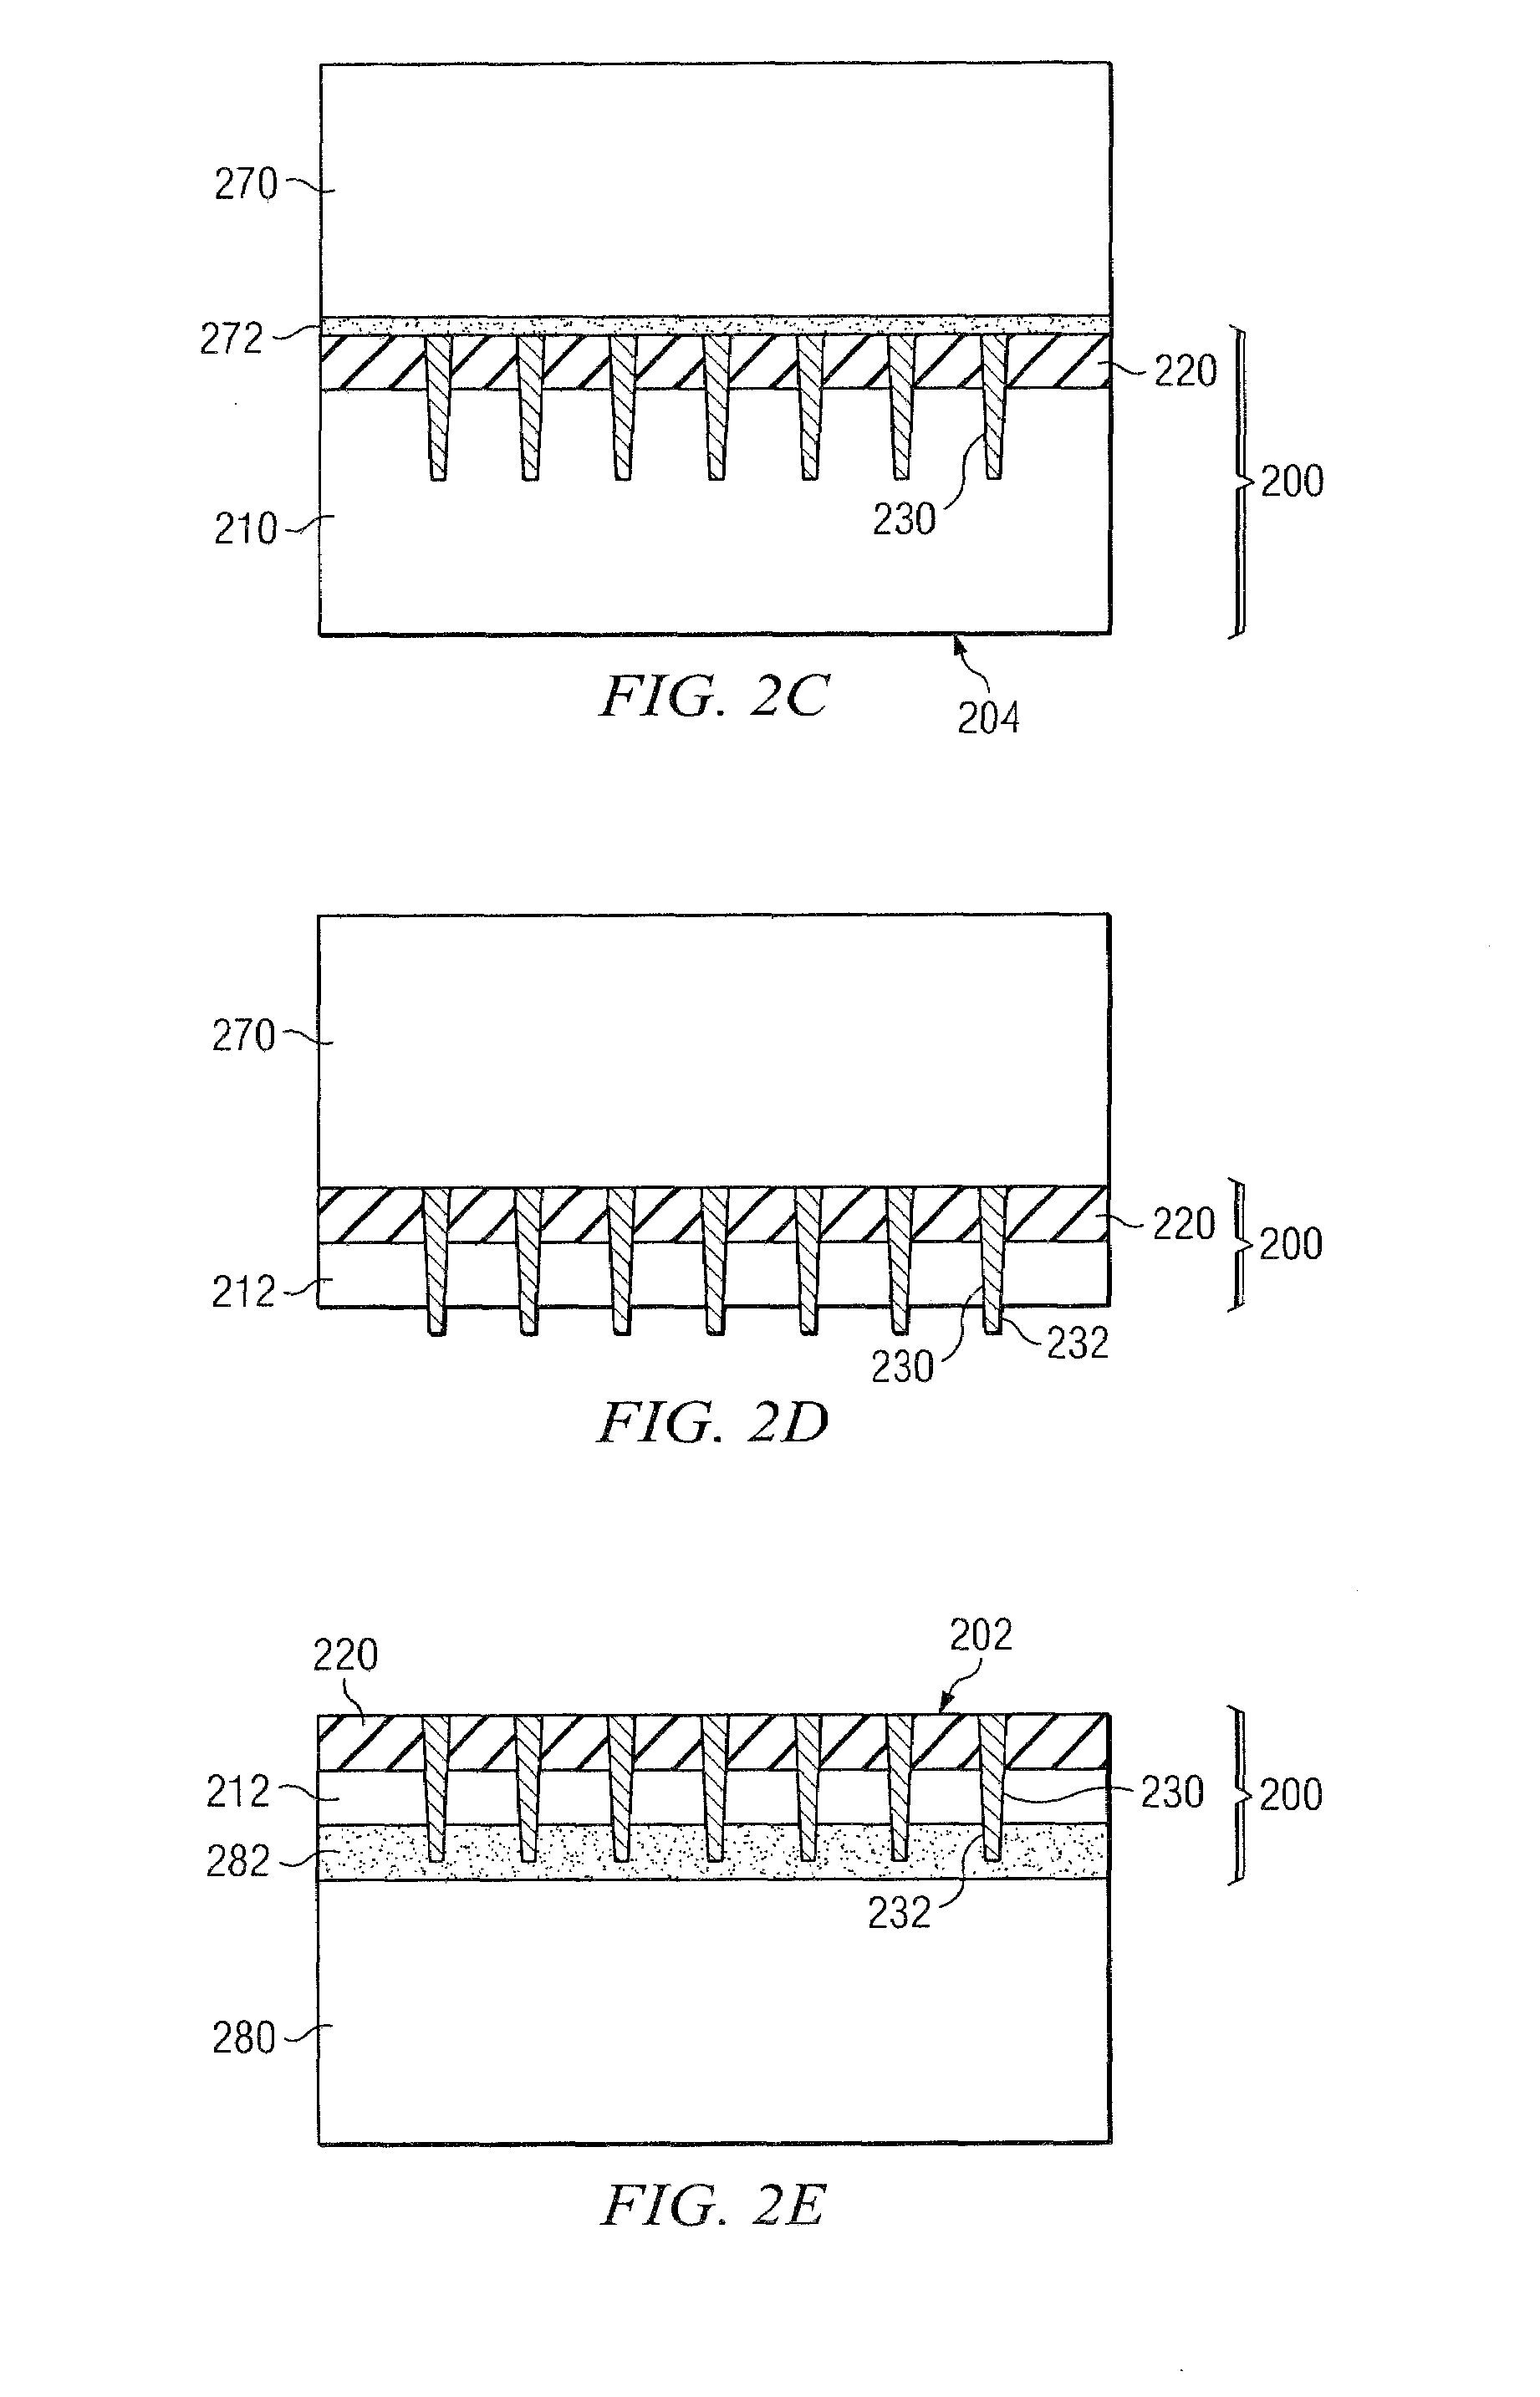 Double wafer carrier process for creating integrated circuit die with through-silicon vias and micro-electro-mechanical systems protected by a hermetic cavity created at the wafer level